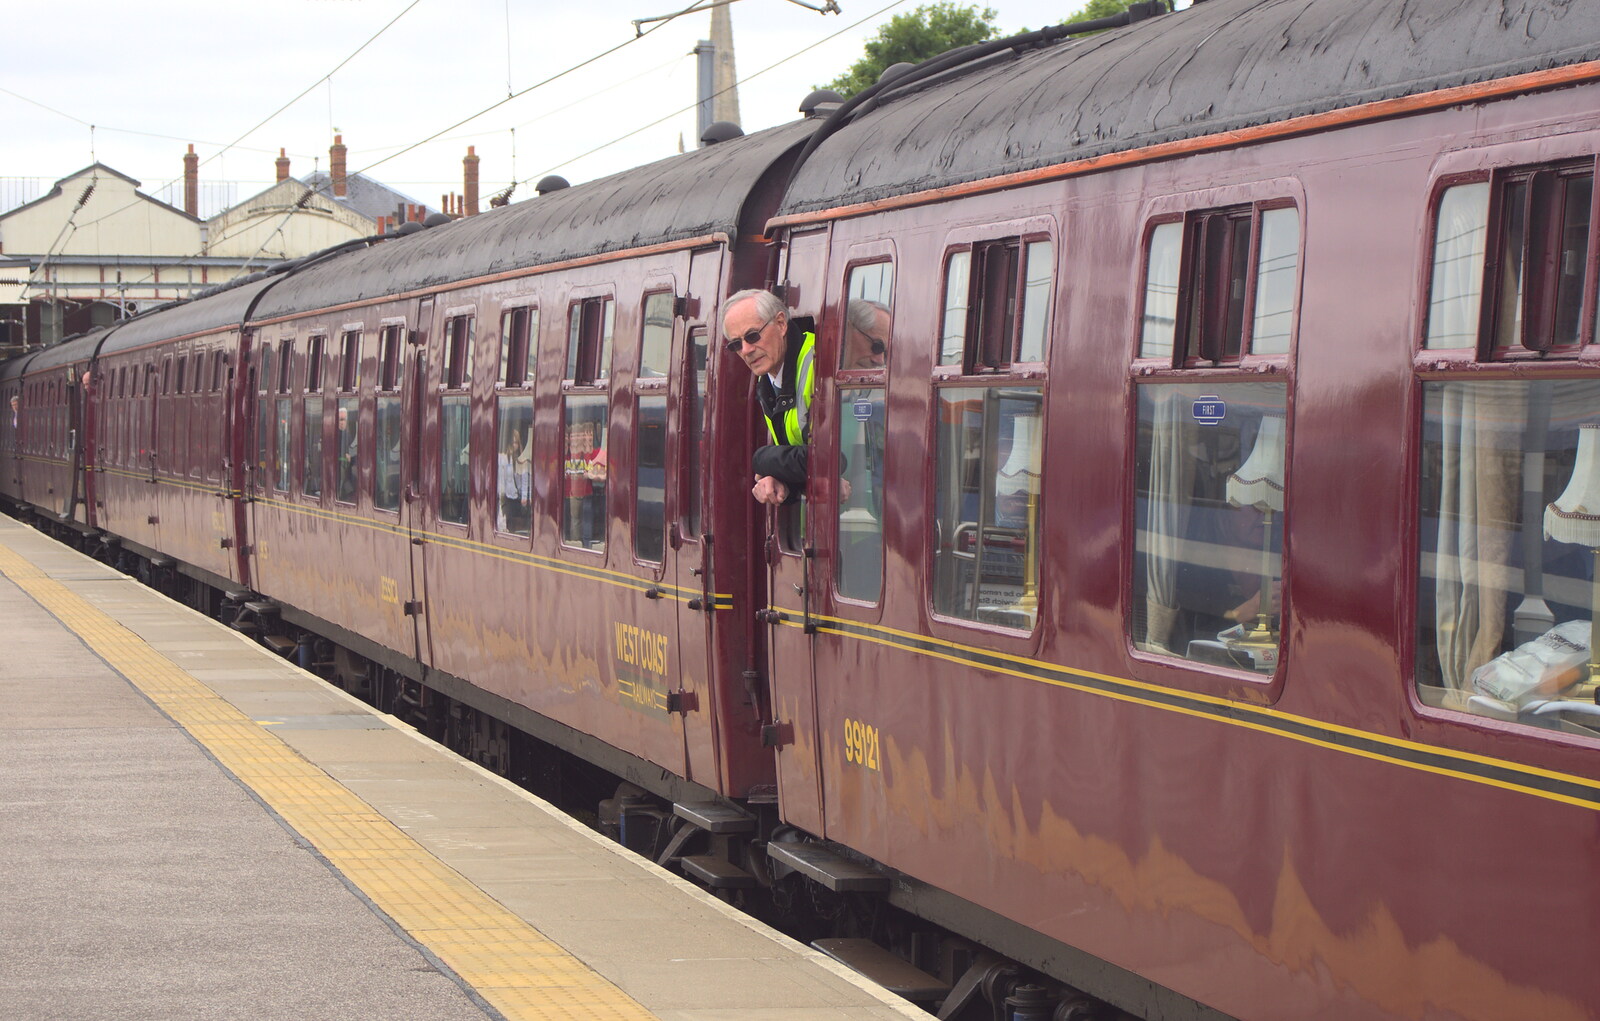 A guard looks out of the carriage from Tangmere at Norwich Station, Norwich, Norfolk - 25th May 2013